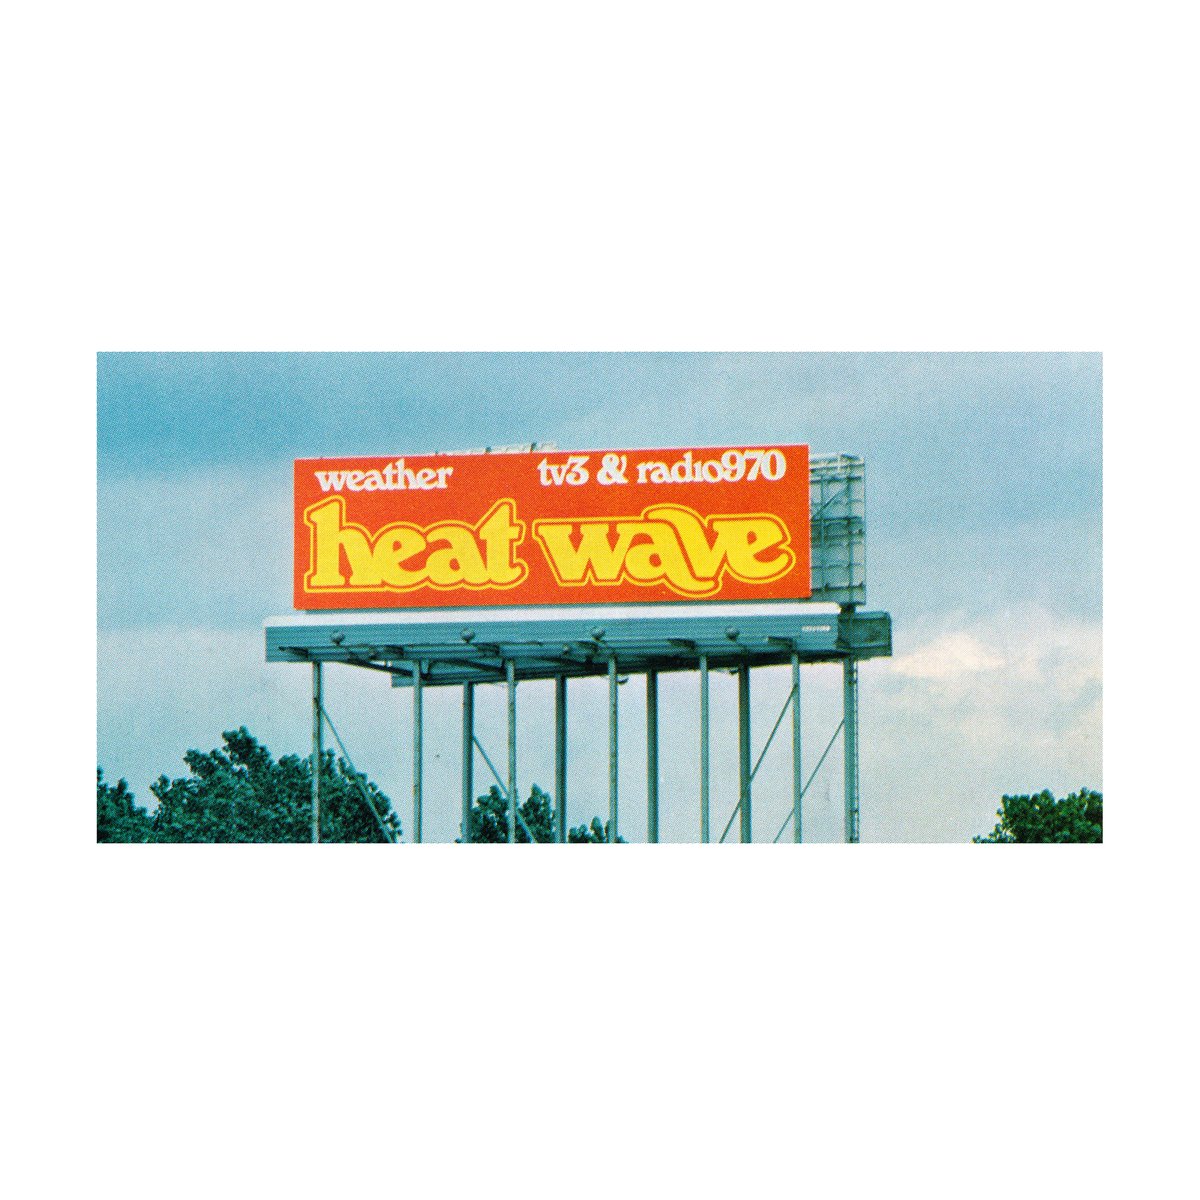 Some 80s American radio goodness. Wave designed by Stewart & Winner. Discover American logomarks at logo-archive.org #logos #graphicdesign #branding #designhistory #graphicdesign